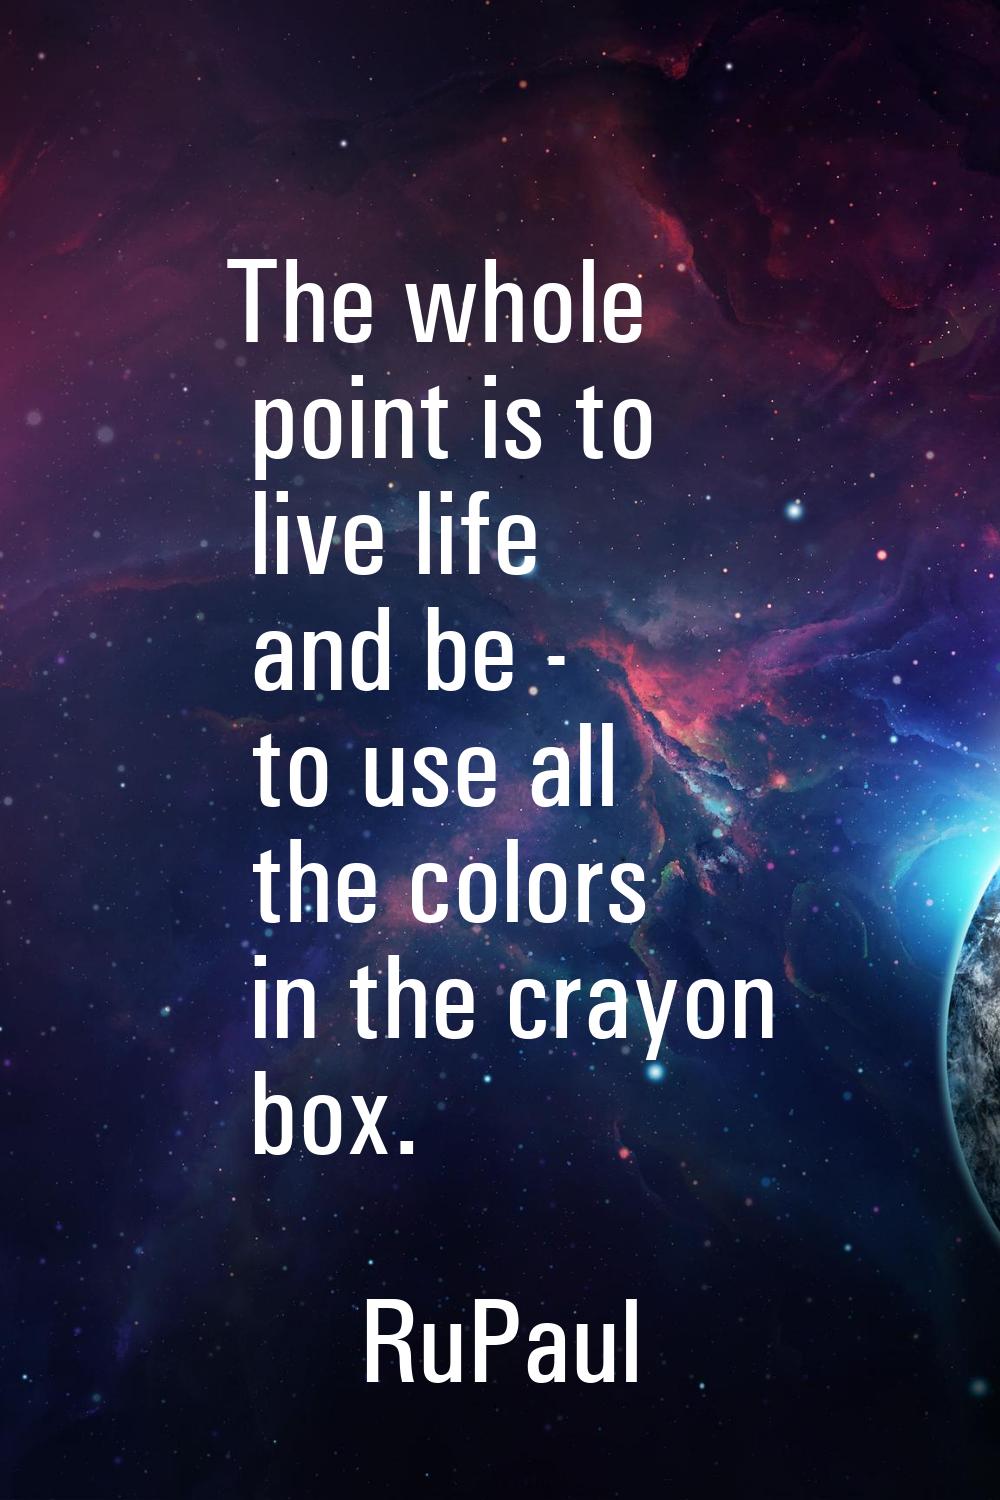 The whole point is to live life and be - to use all the colors in the crayon box.